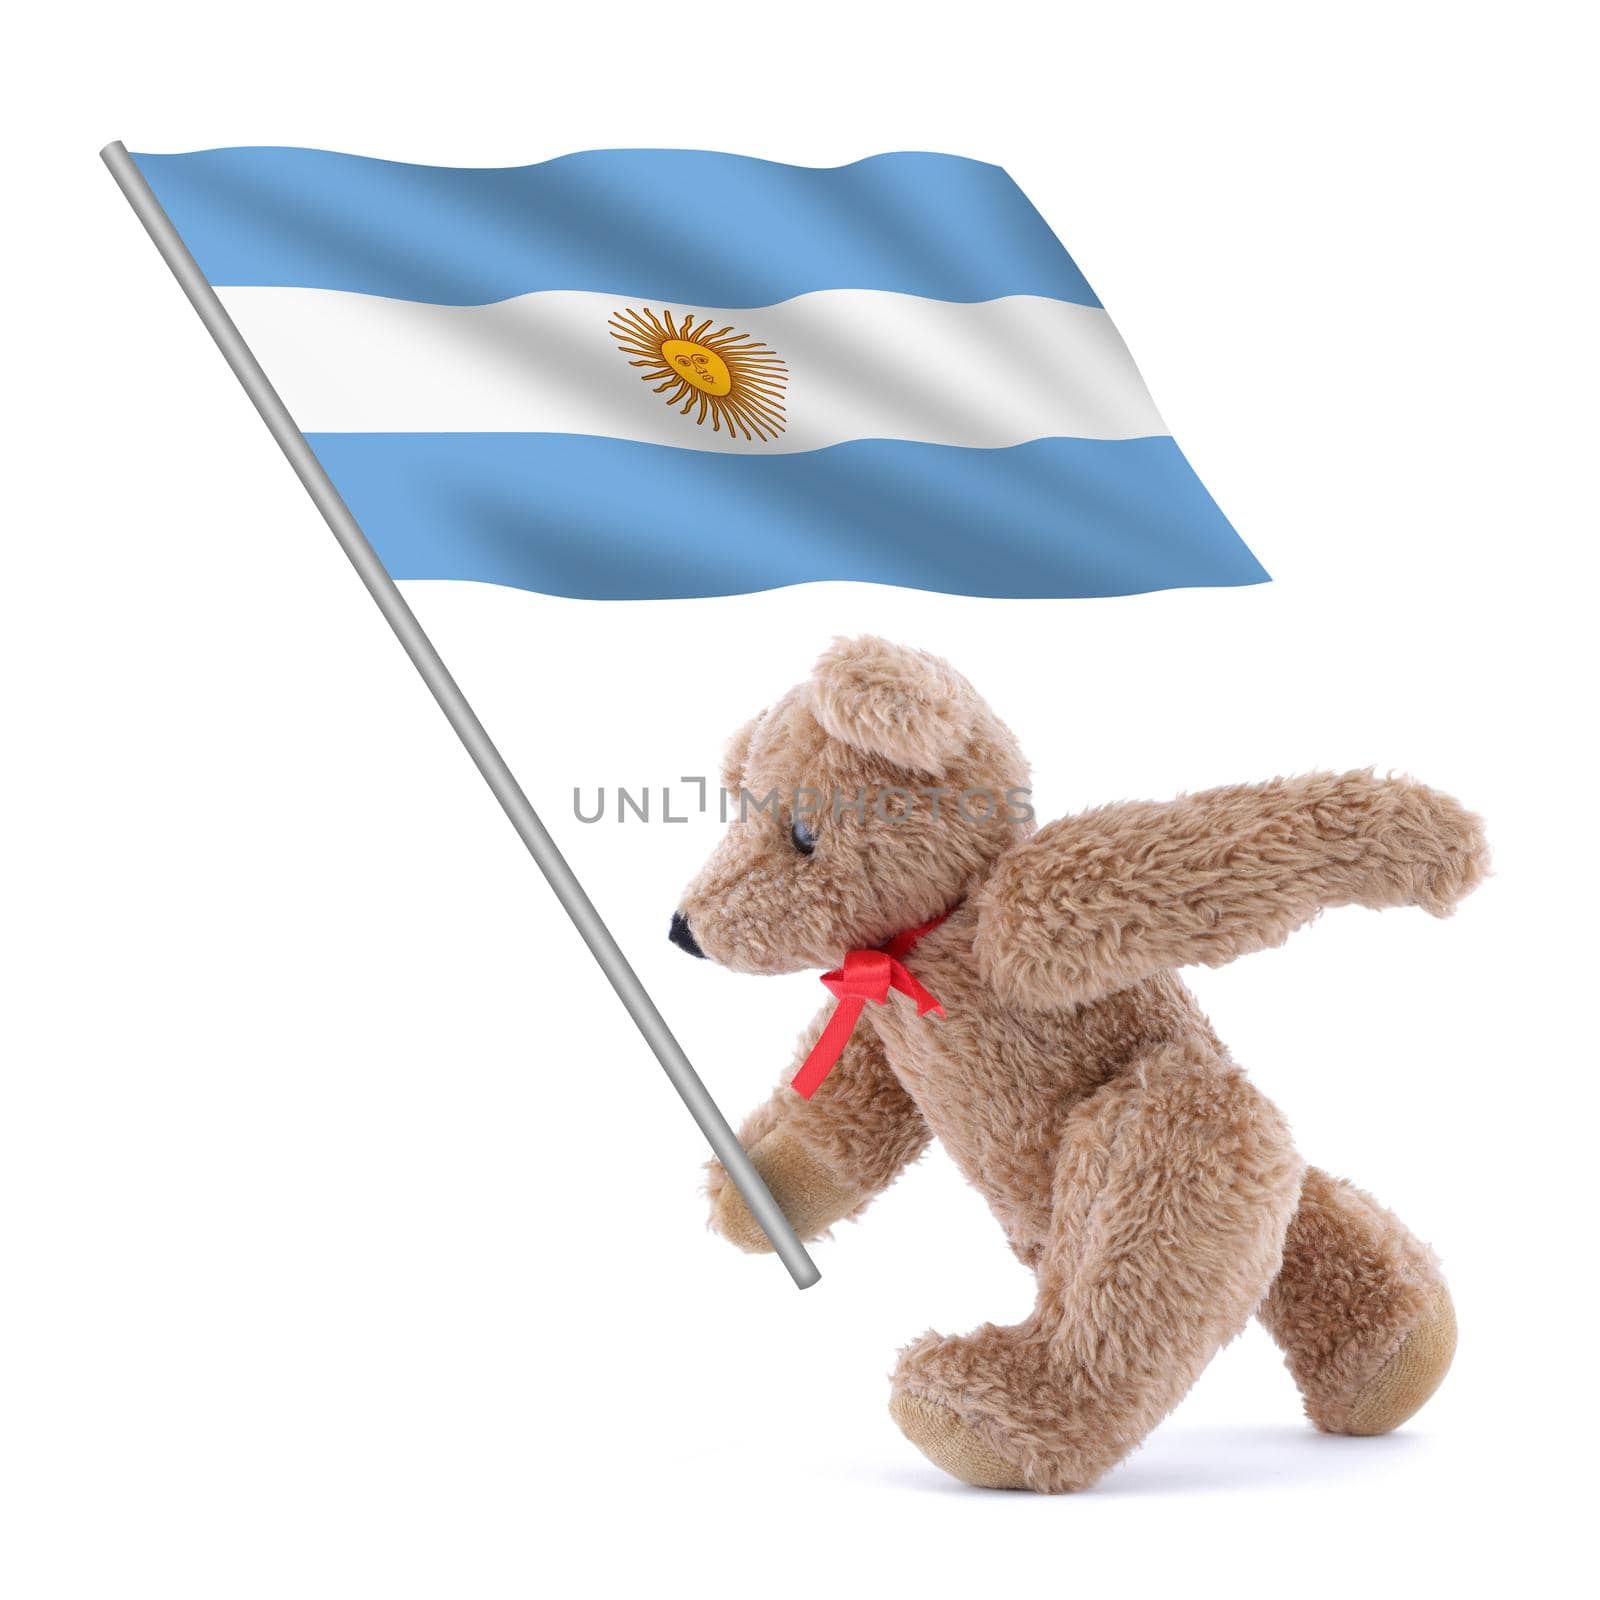 An Argentina flag being carried by a cute teddy bear blue white stripes yellow Sun of May